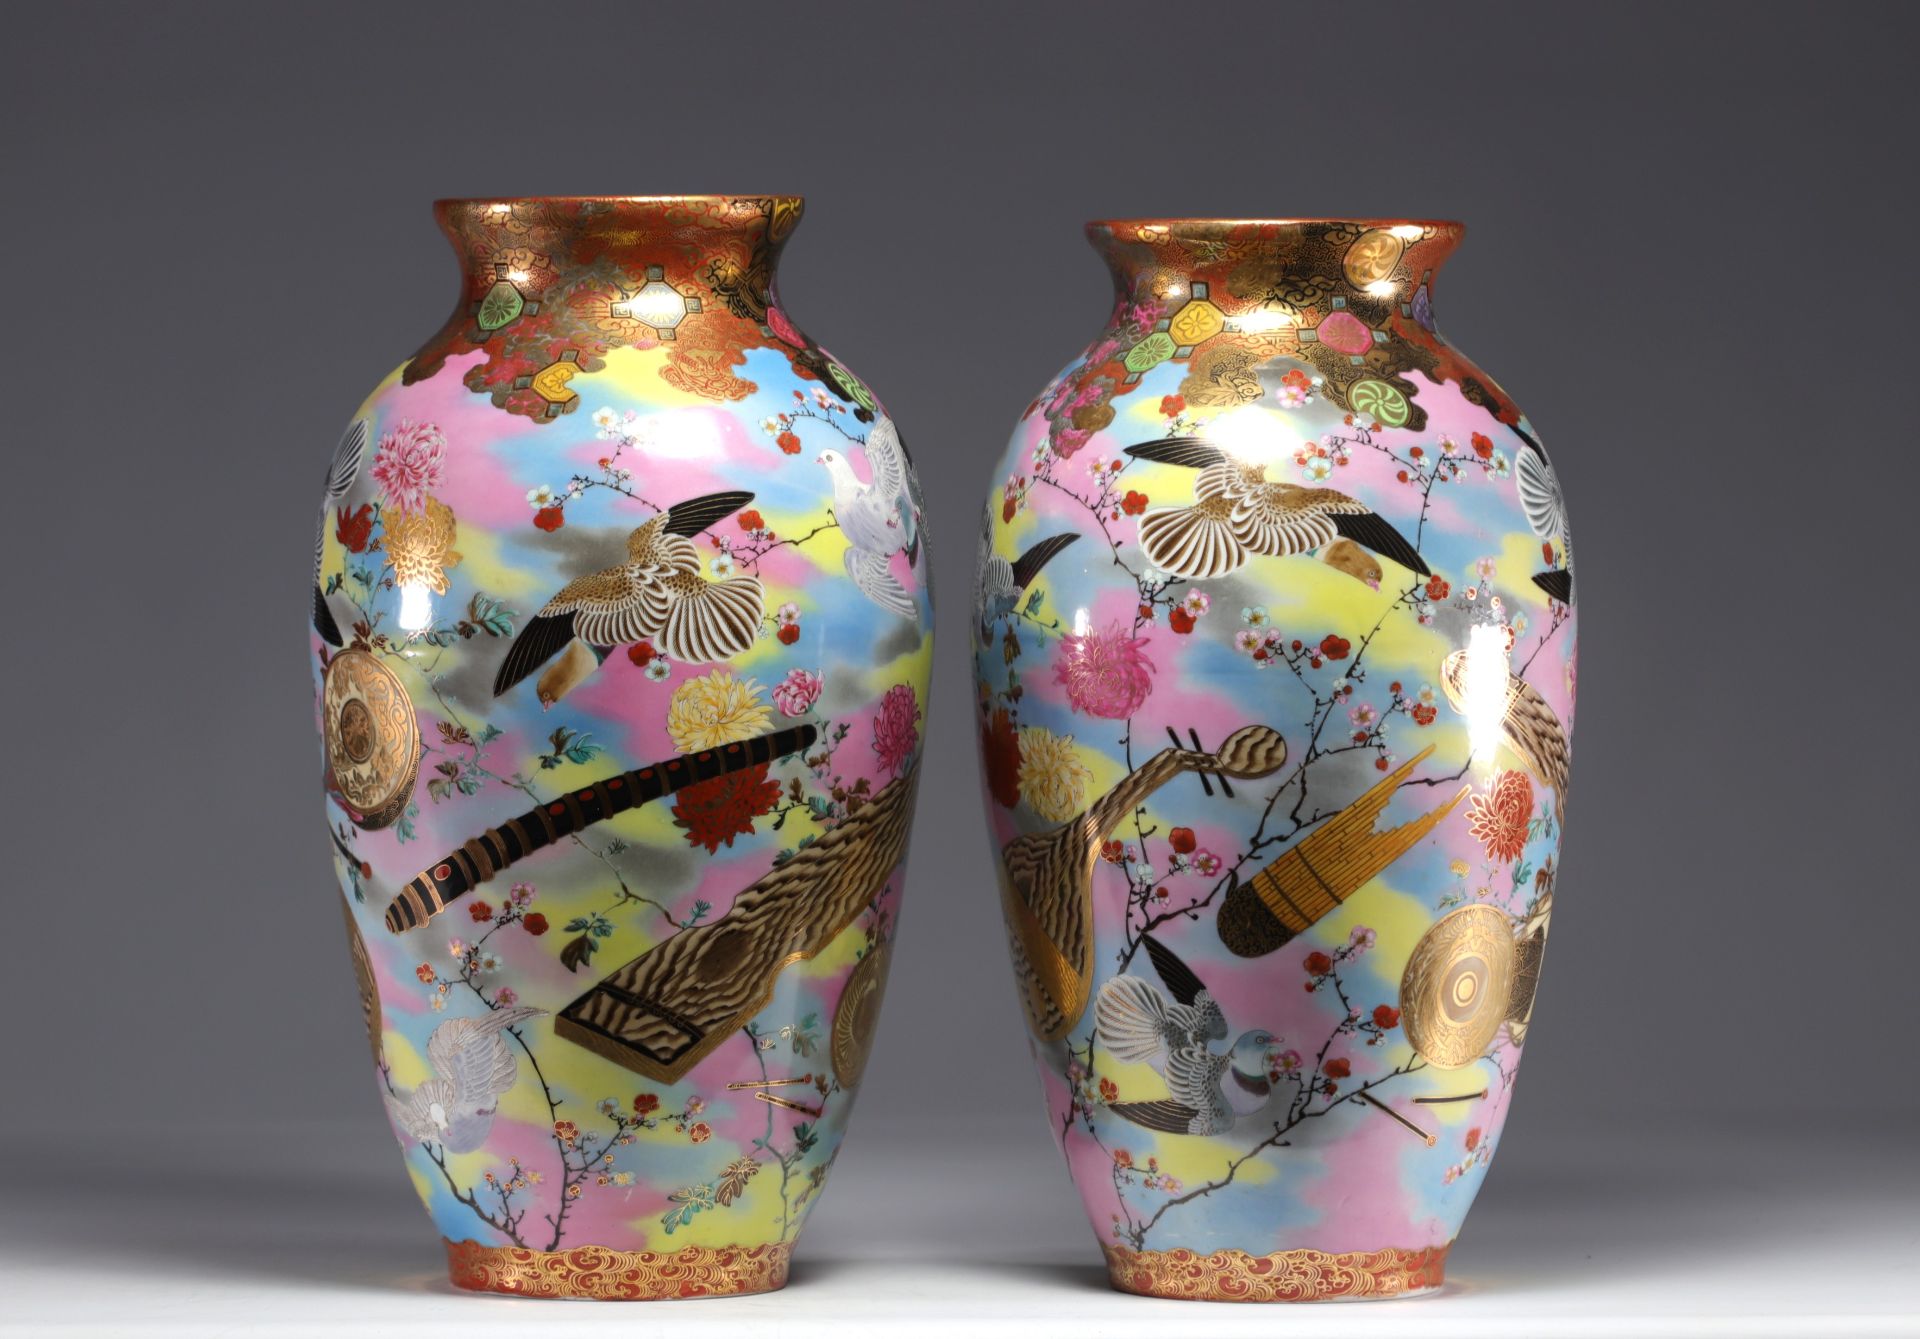 Japan - A pair of Satsuma vases with radiant doves, pigeons and flowers, Meiji period.Â